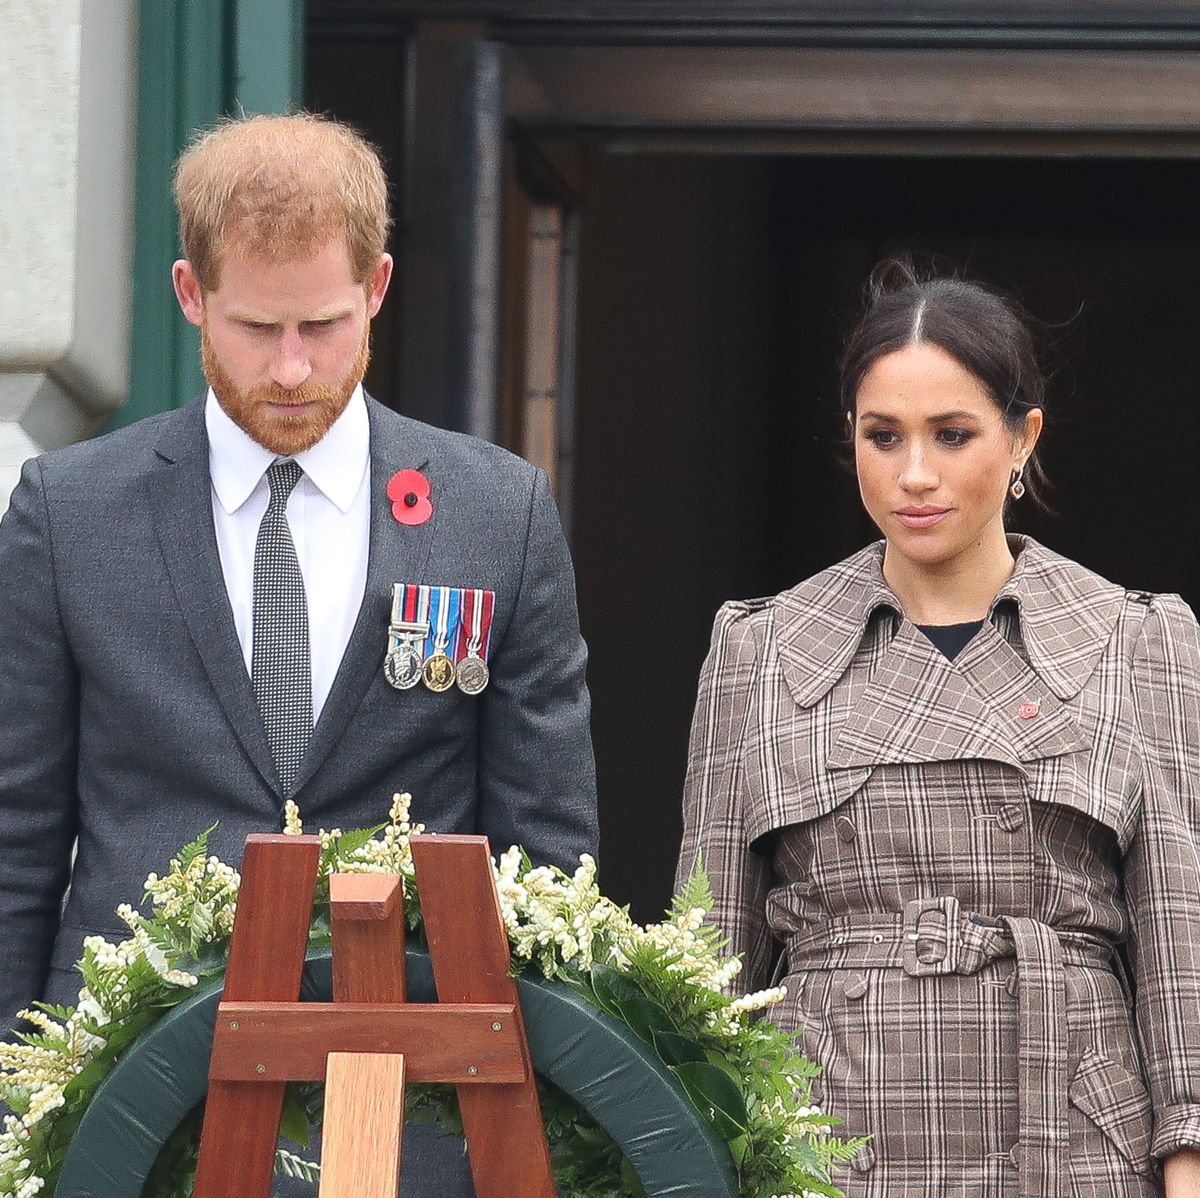 wellington, new zealand   october 28  prince harry, duke of sussex and meghan, duchess of sussex laying wreath at the national war memorial on october 28, 2018 in wellington, new zealand the duke and duchess of sussex are on their official 16 day autumn tour visiting cities in australia, fiji, tonga and new zealand  photo by chris jacksongetty images